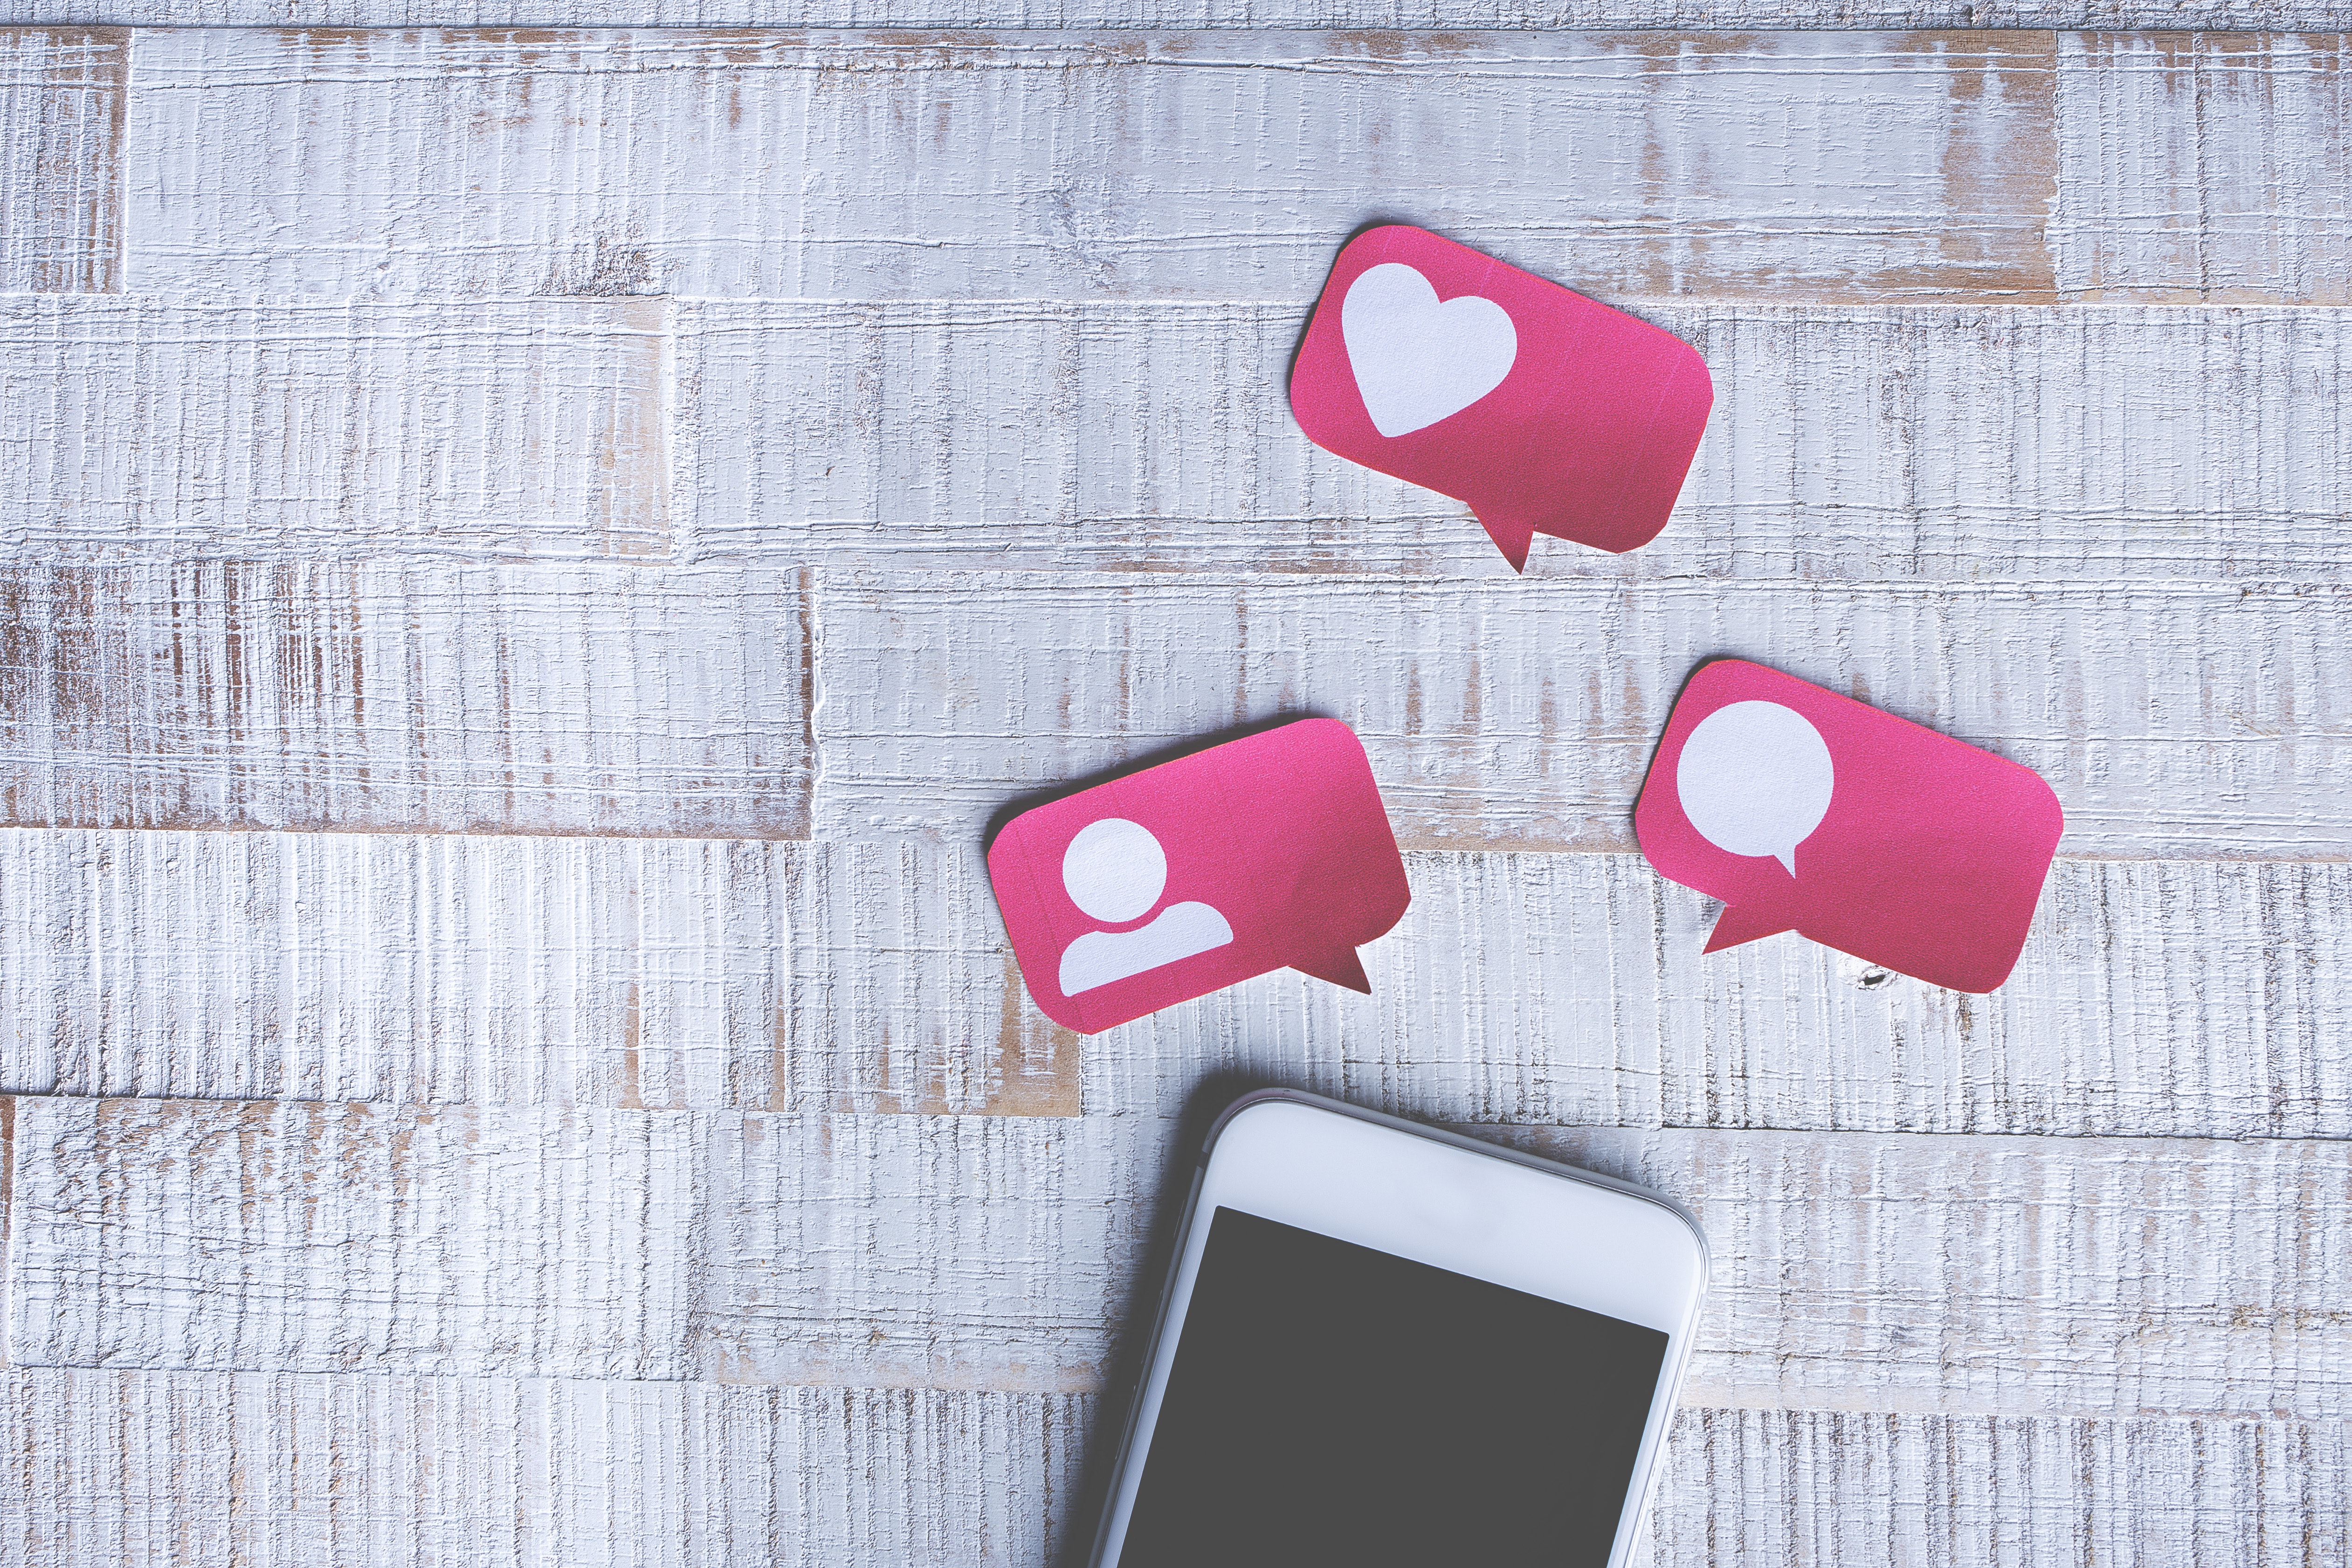 Swipe-Based Dating Apps Can Negatively Affect Mental Health, Research Finds